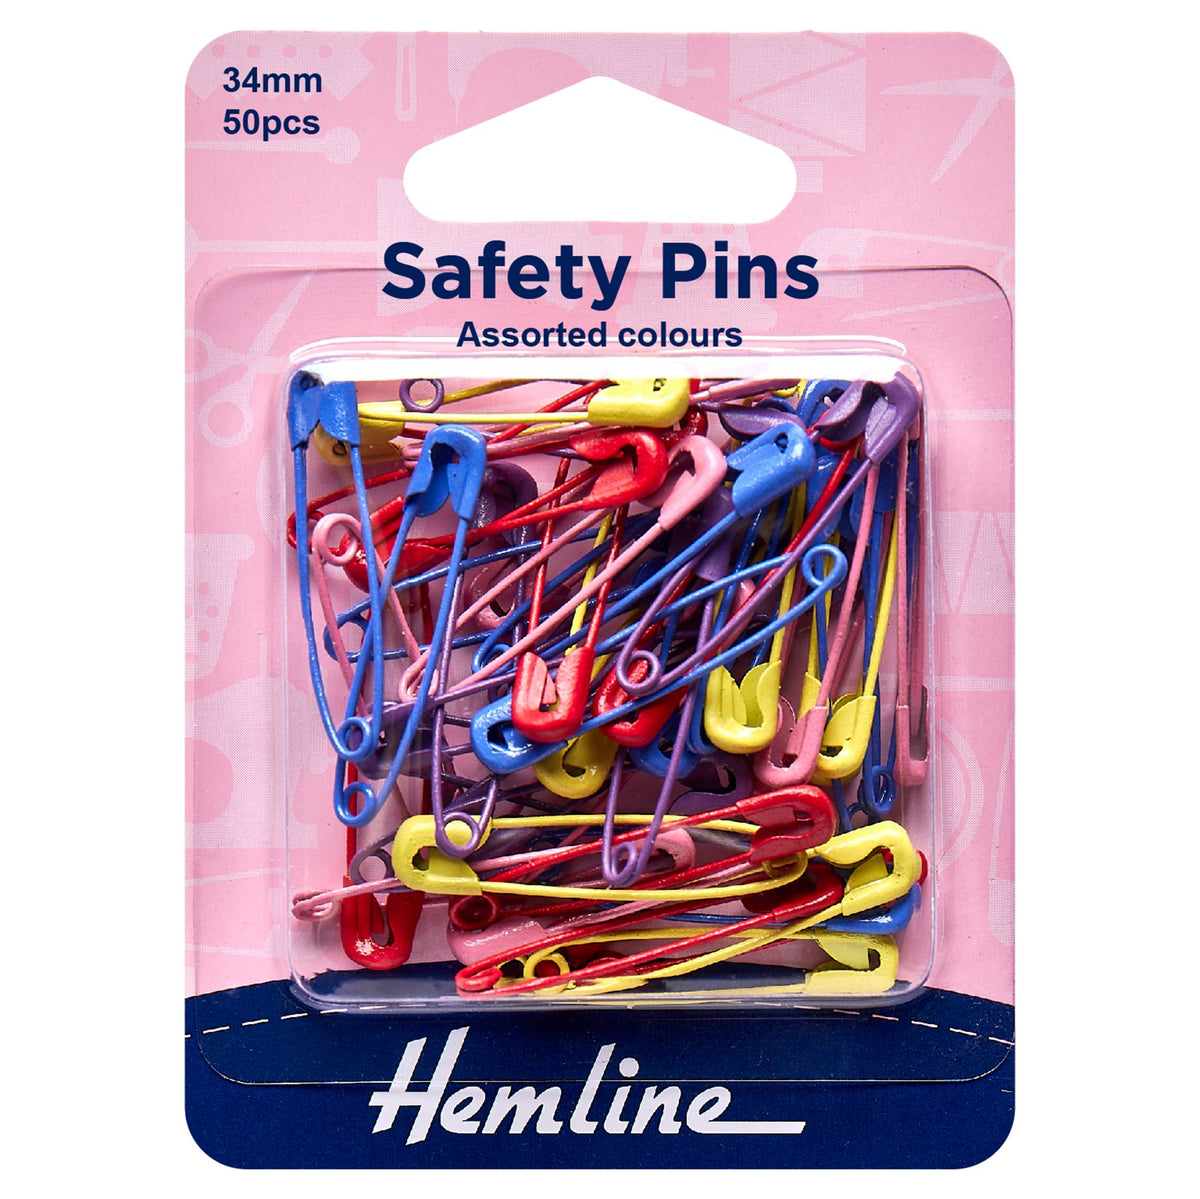 Safety Pins: 34mm Assorted Colours: (50 Pieces)